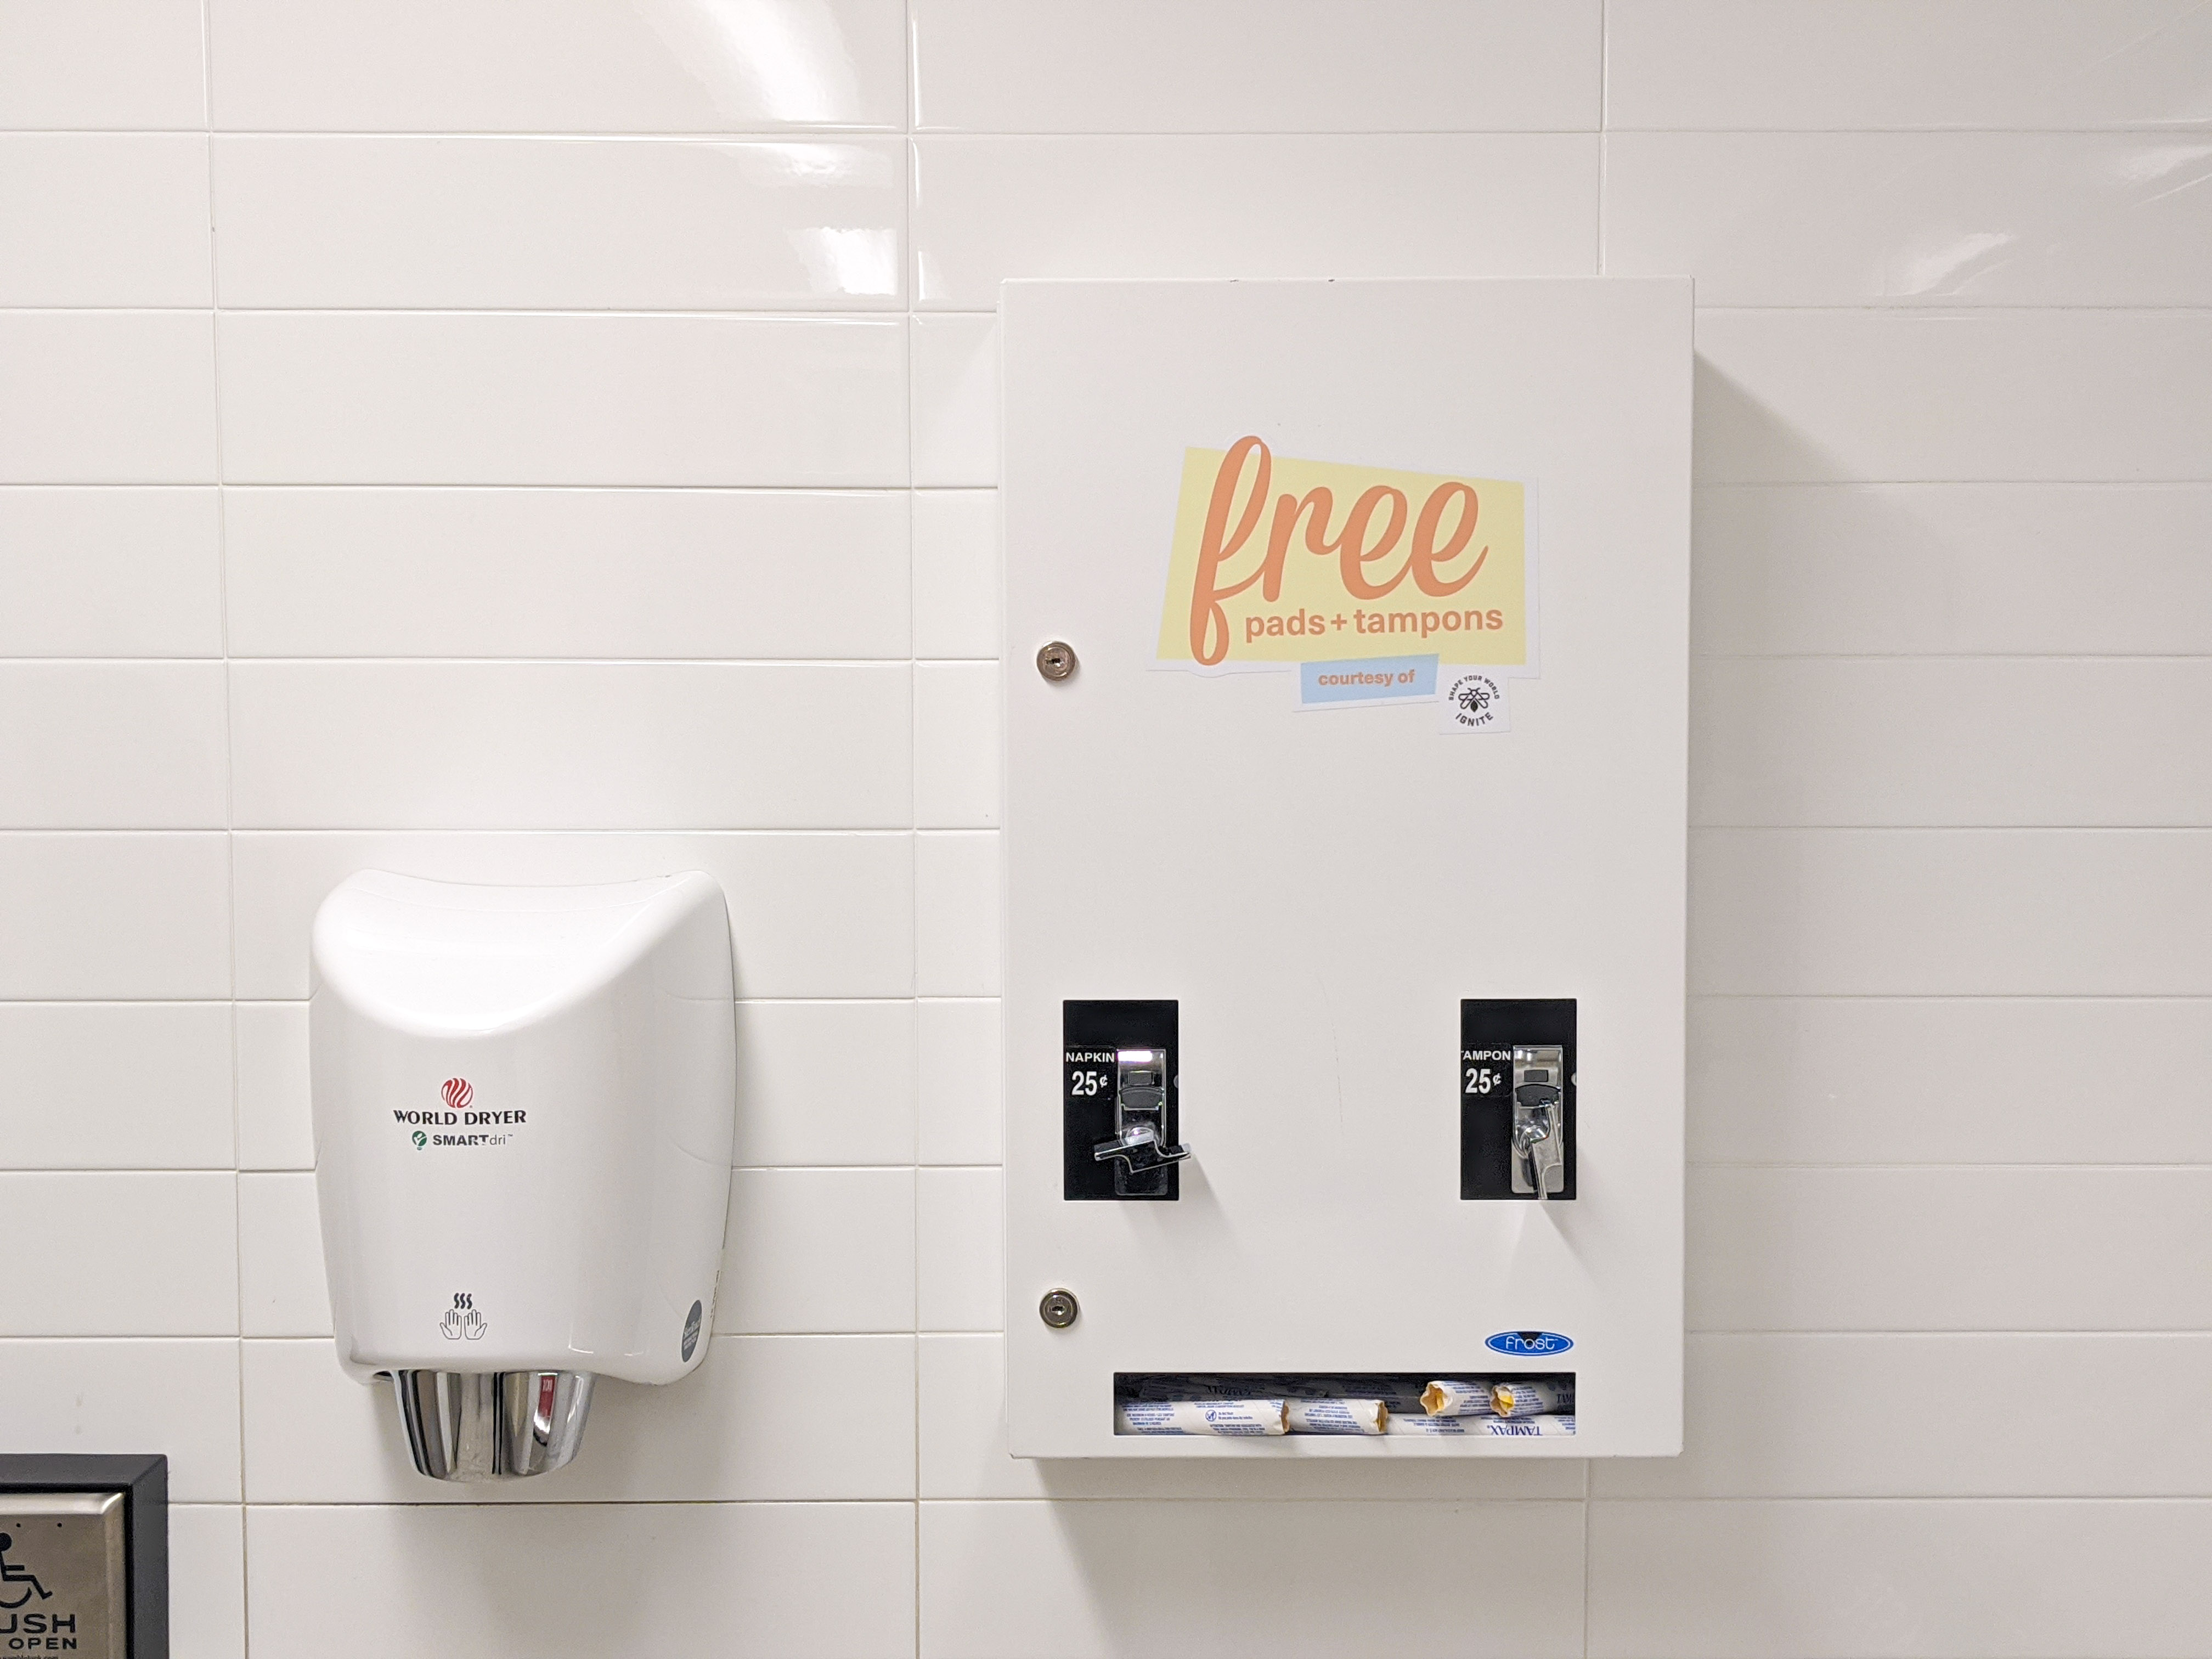 a tampon dispenser with IGNITE branding